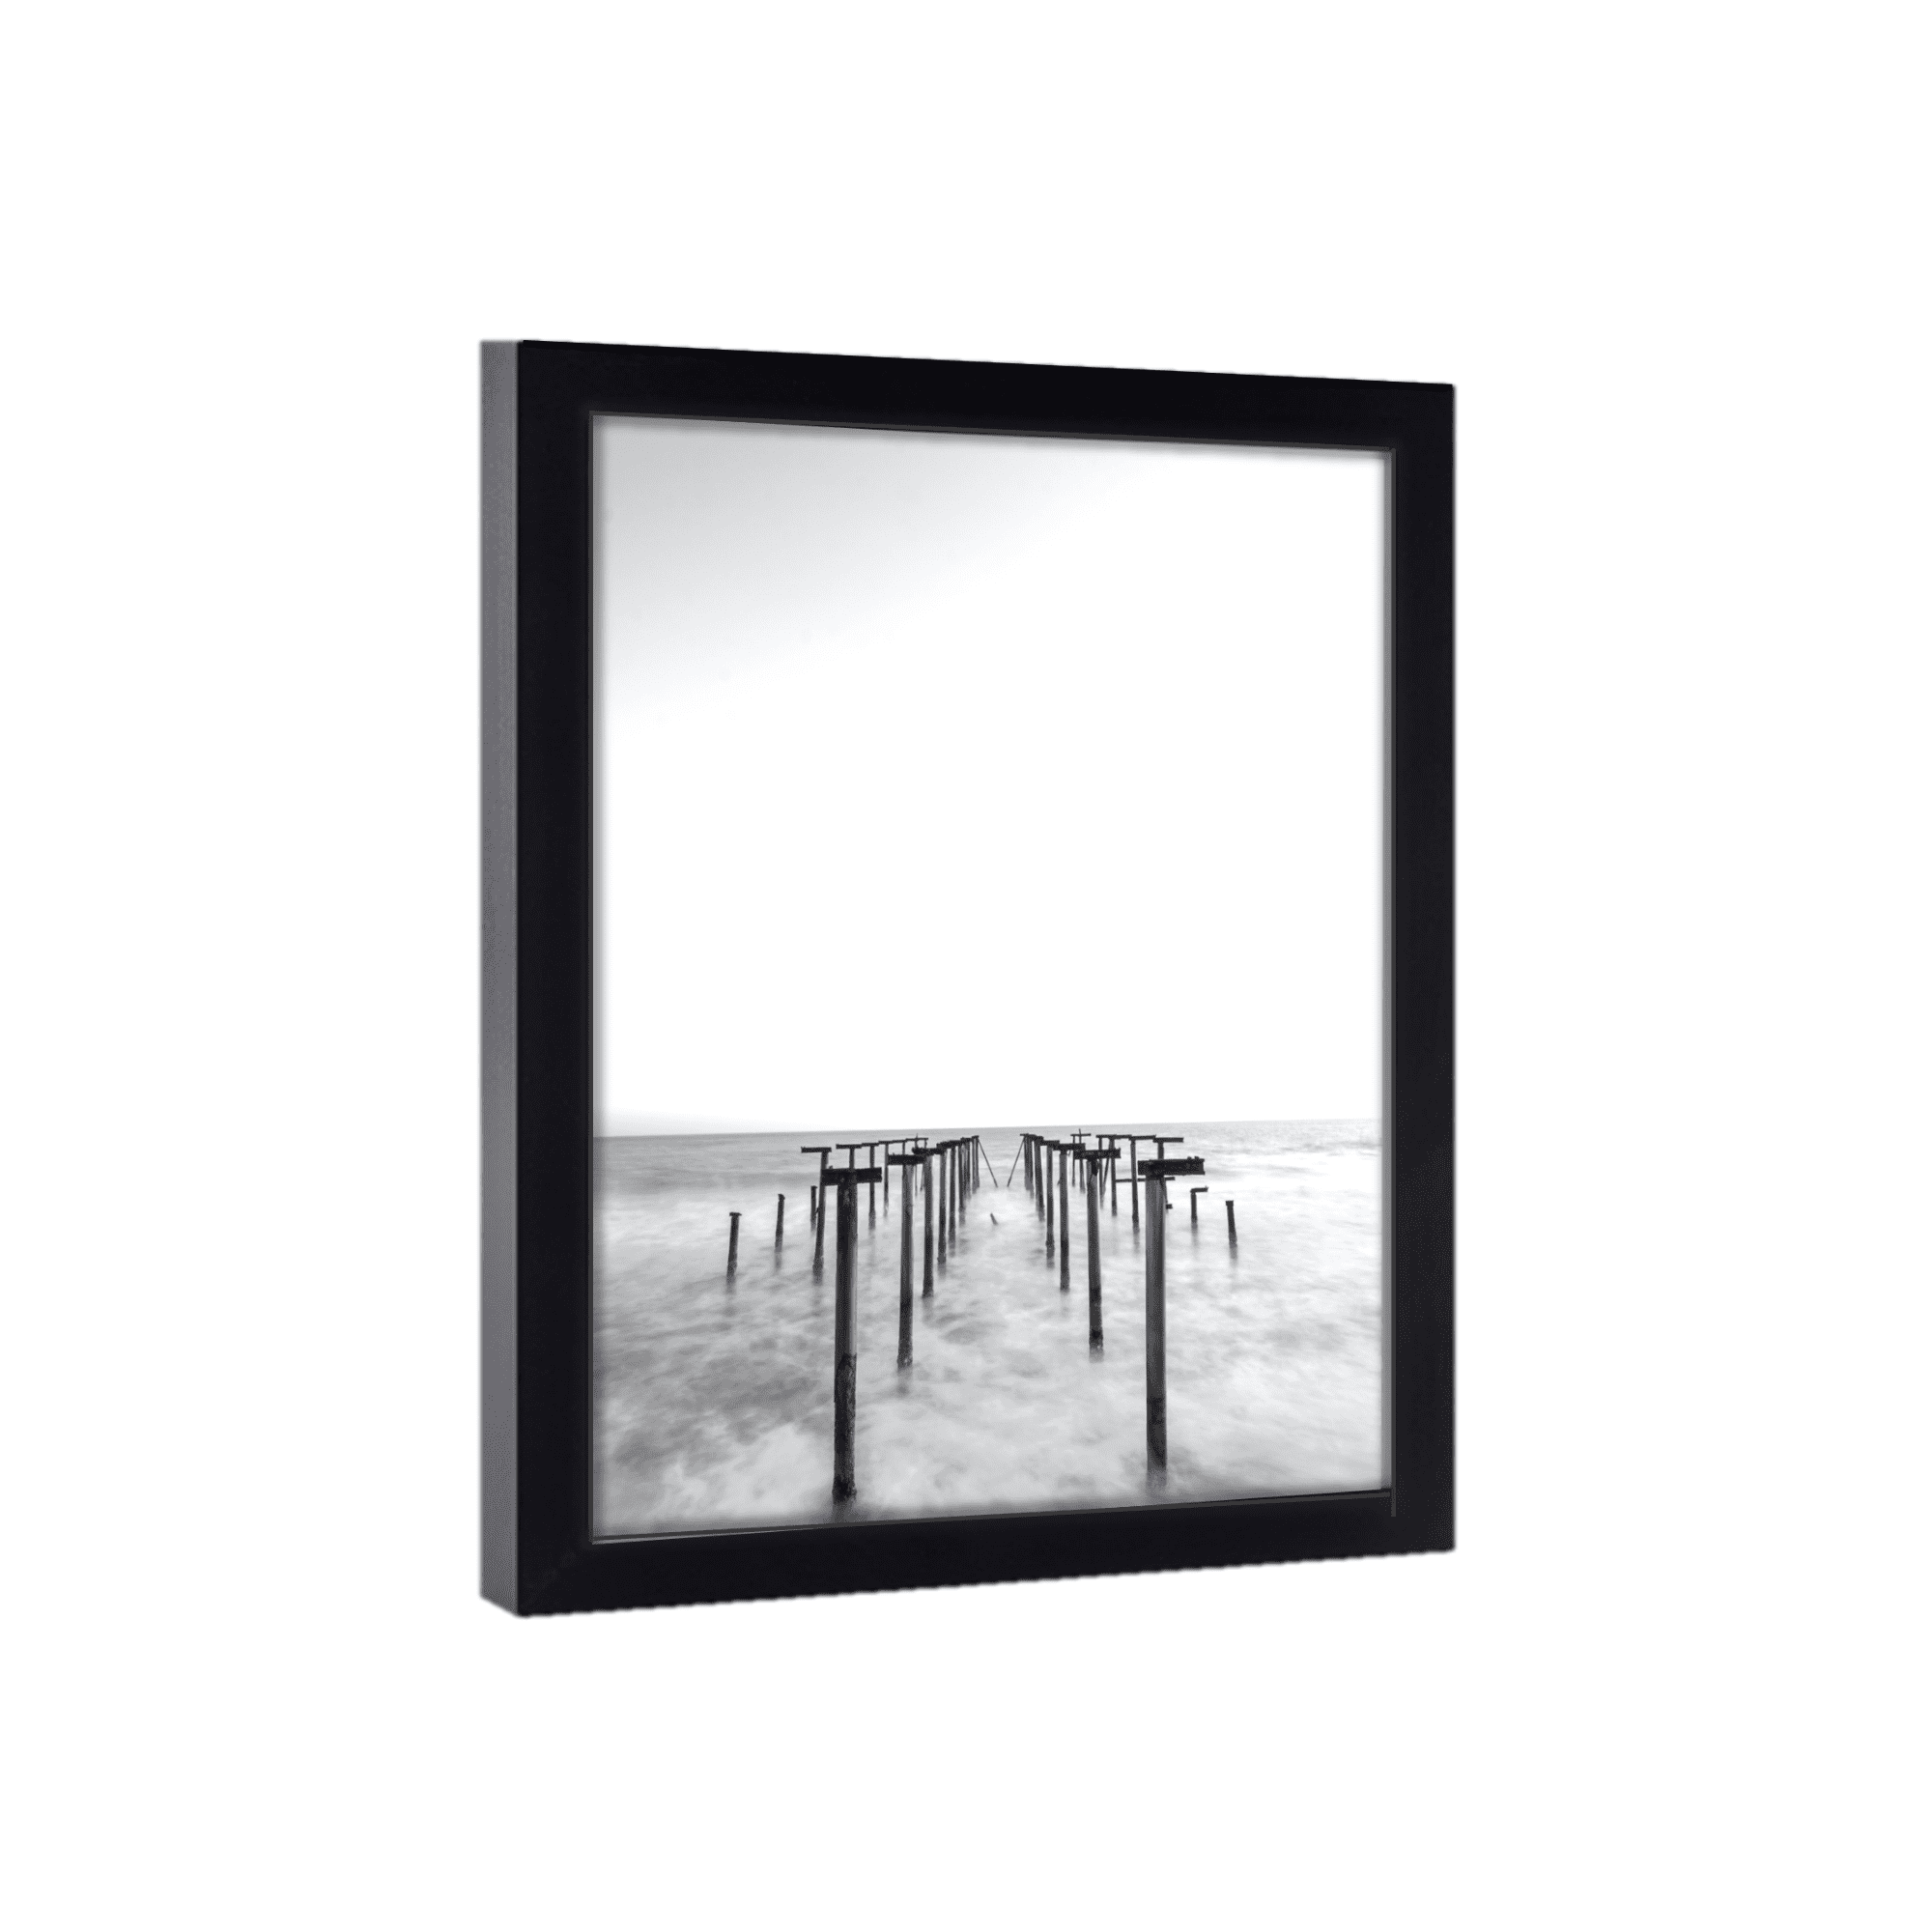 20x12 PANORAMIC PICTURE PHOTO POSTER WOOD FRAME Phoenix Black 